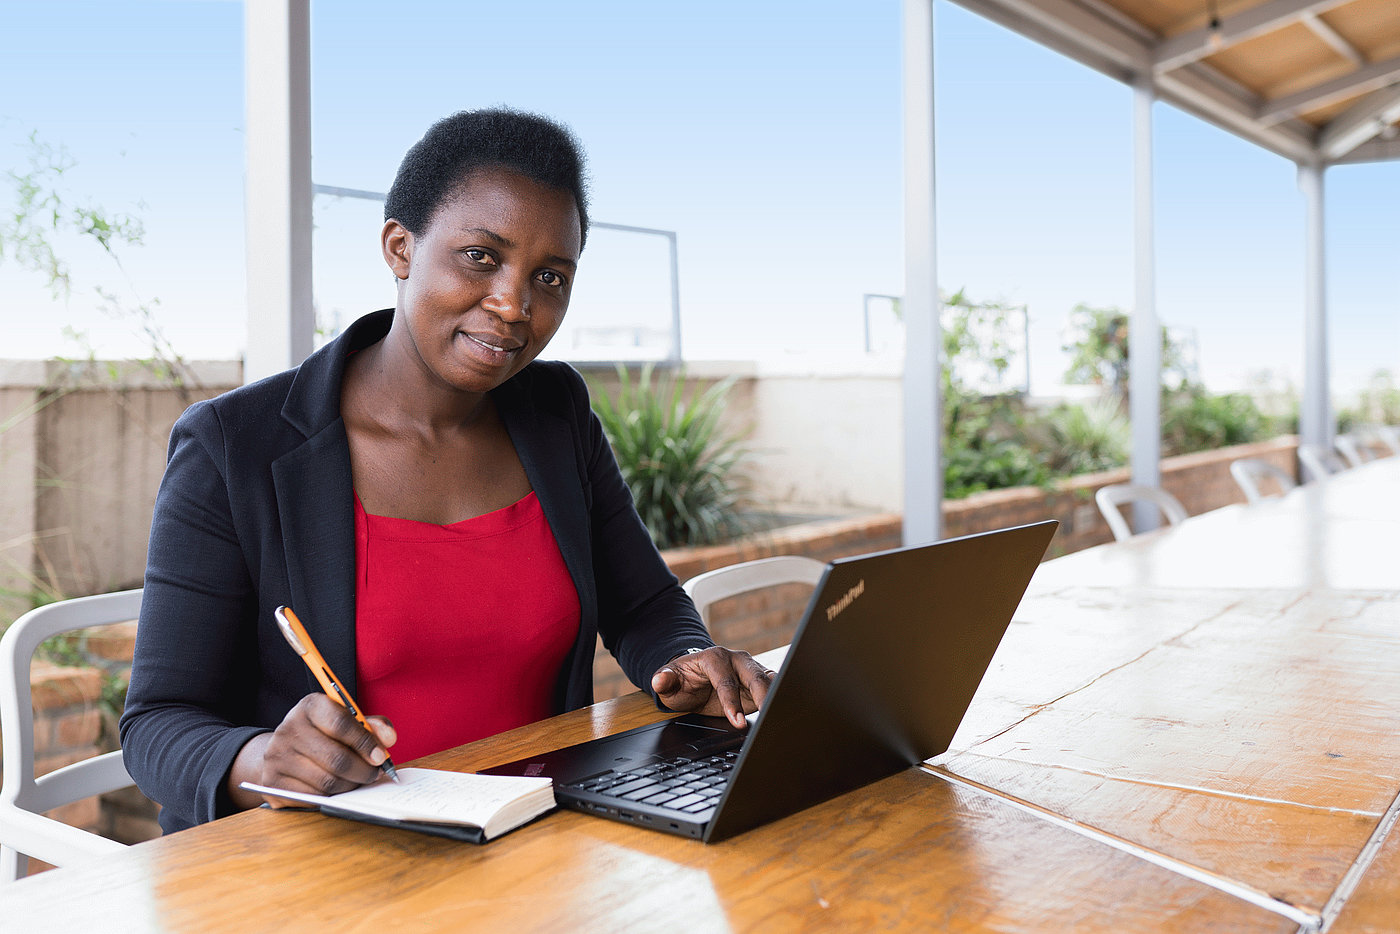 Photo: A woman sits at a desk outside. She has a laptop open in front of her. She is jotting something down in a notebook, which lies beside the laptop on the table.